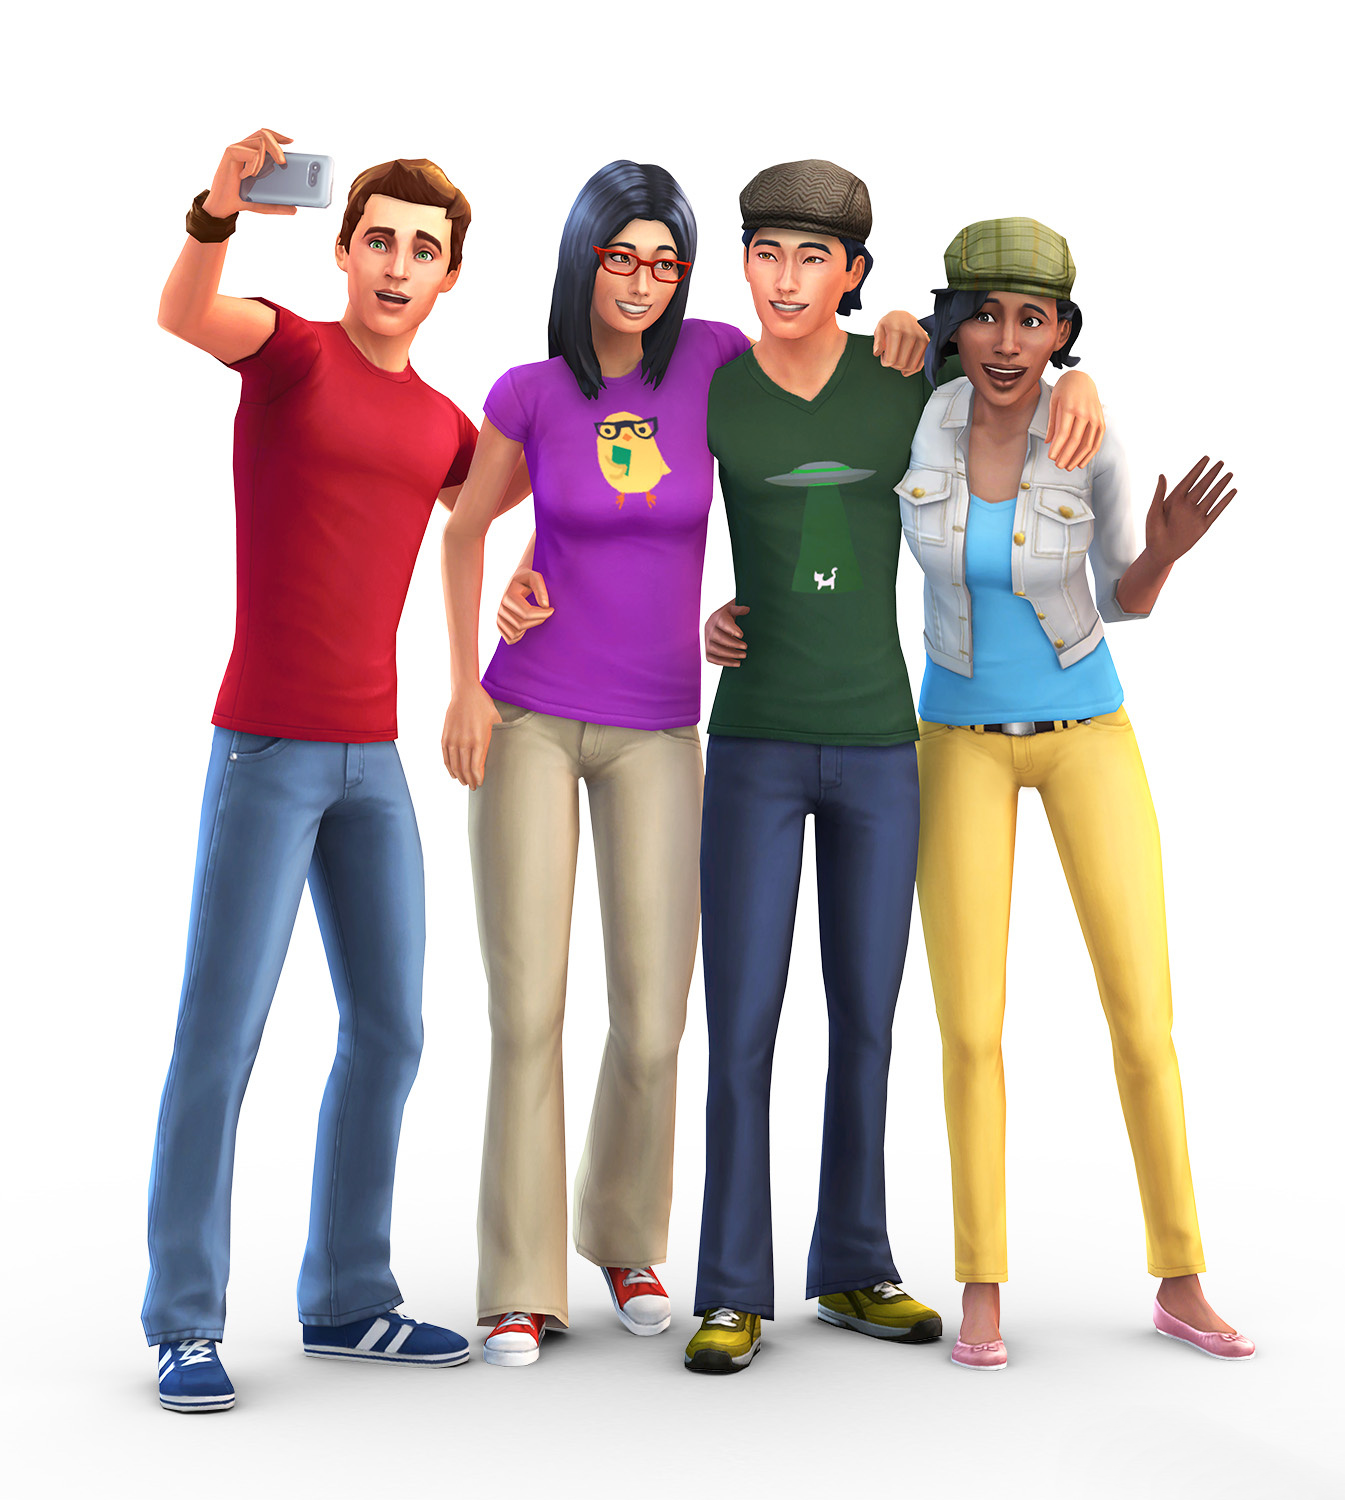 The Sims 4 Getting Gender Cus